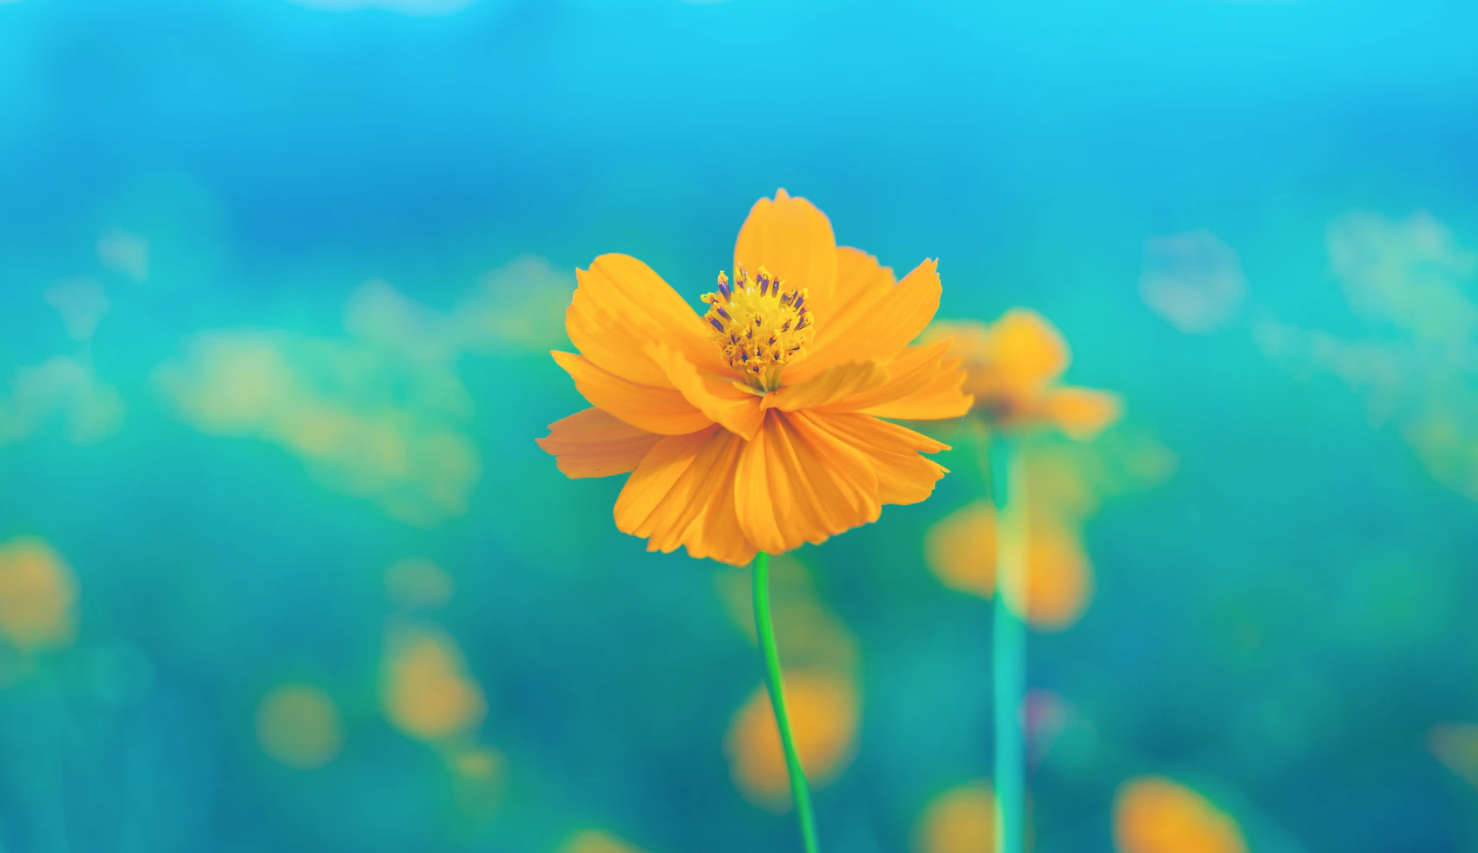 yellow flower over a blue background